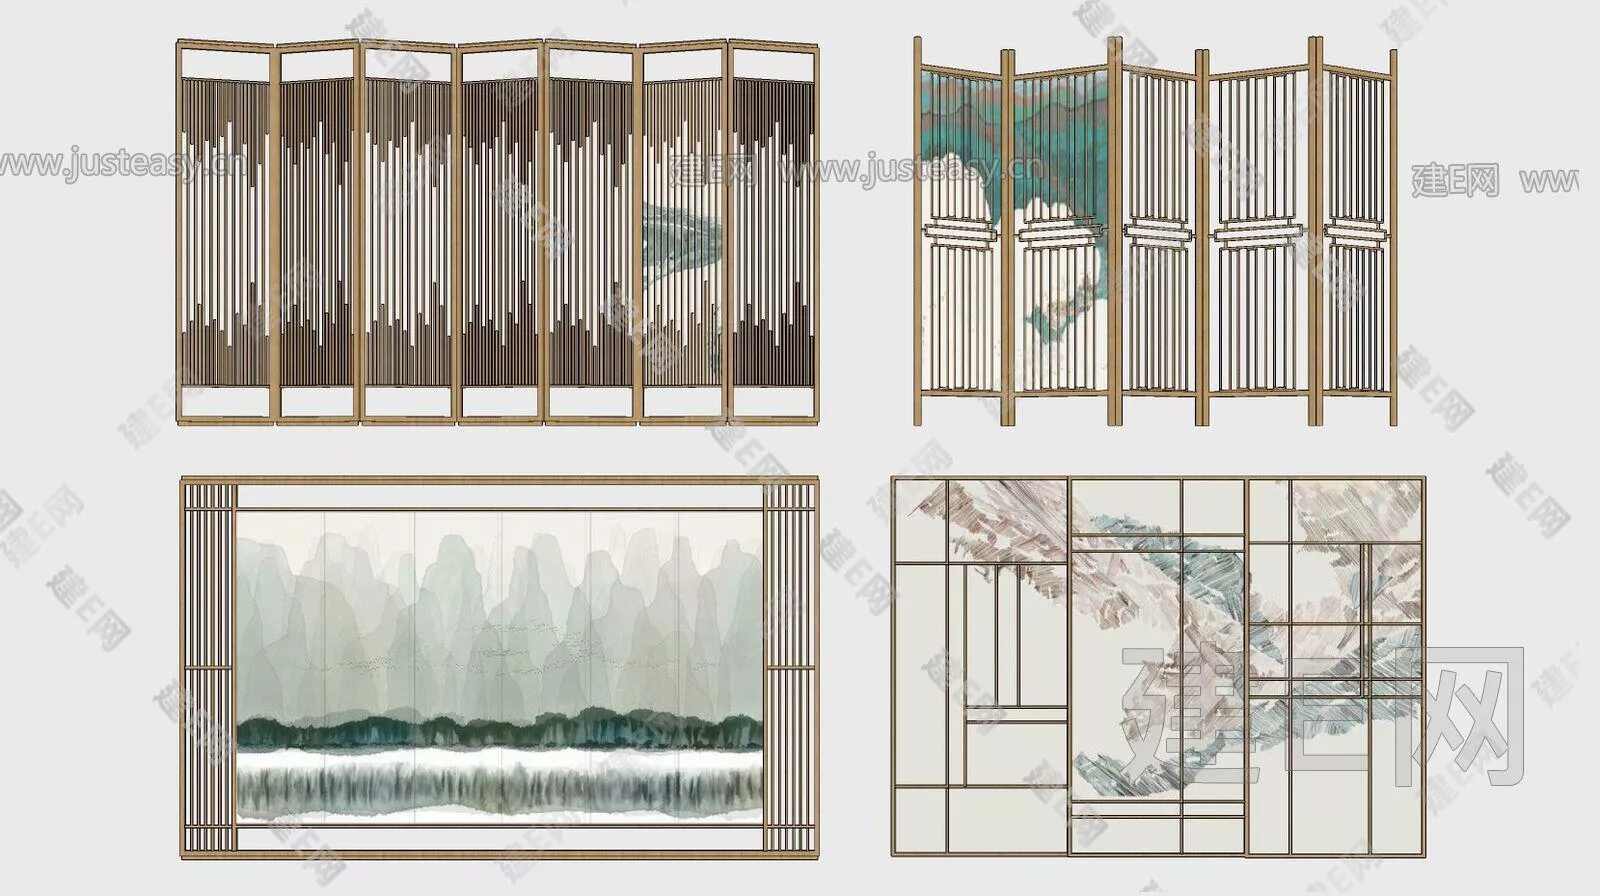 CHINESE PARTITION SCREEN - SKETCHUP 3D MODEL - ENSCAPE - 111755621